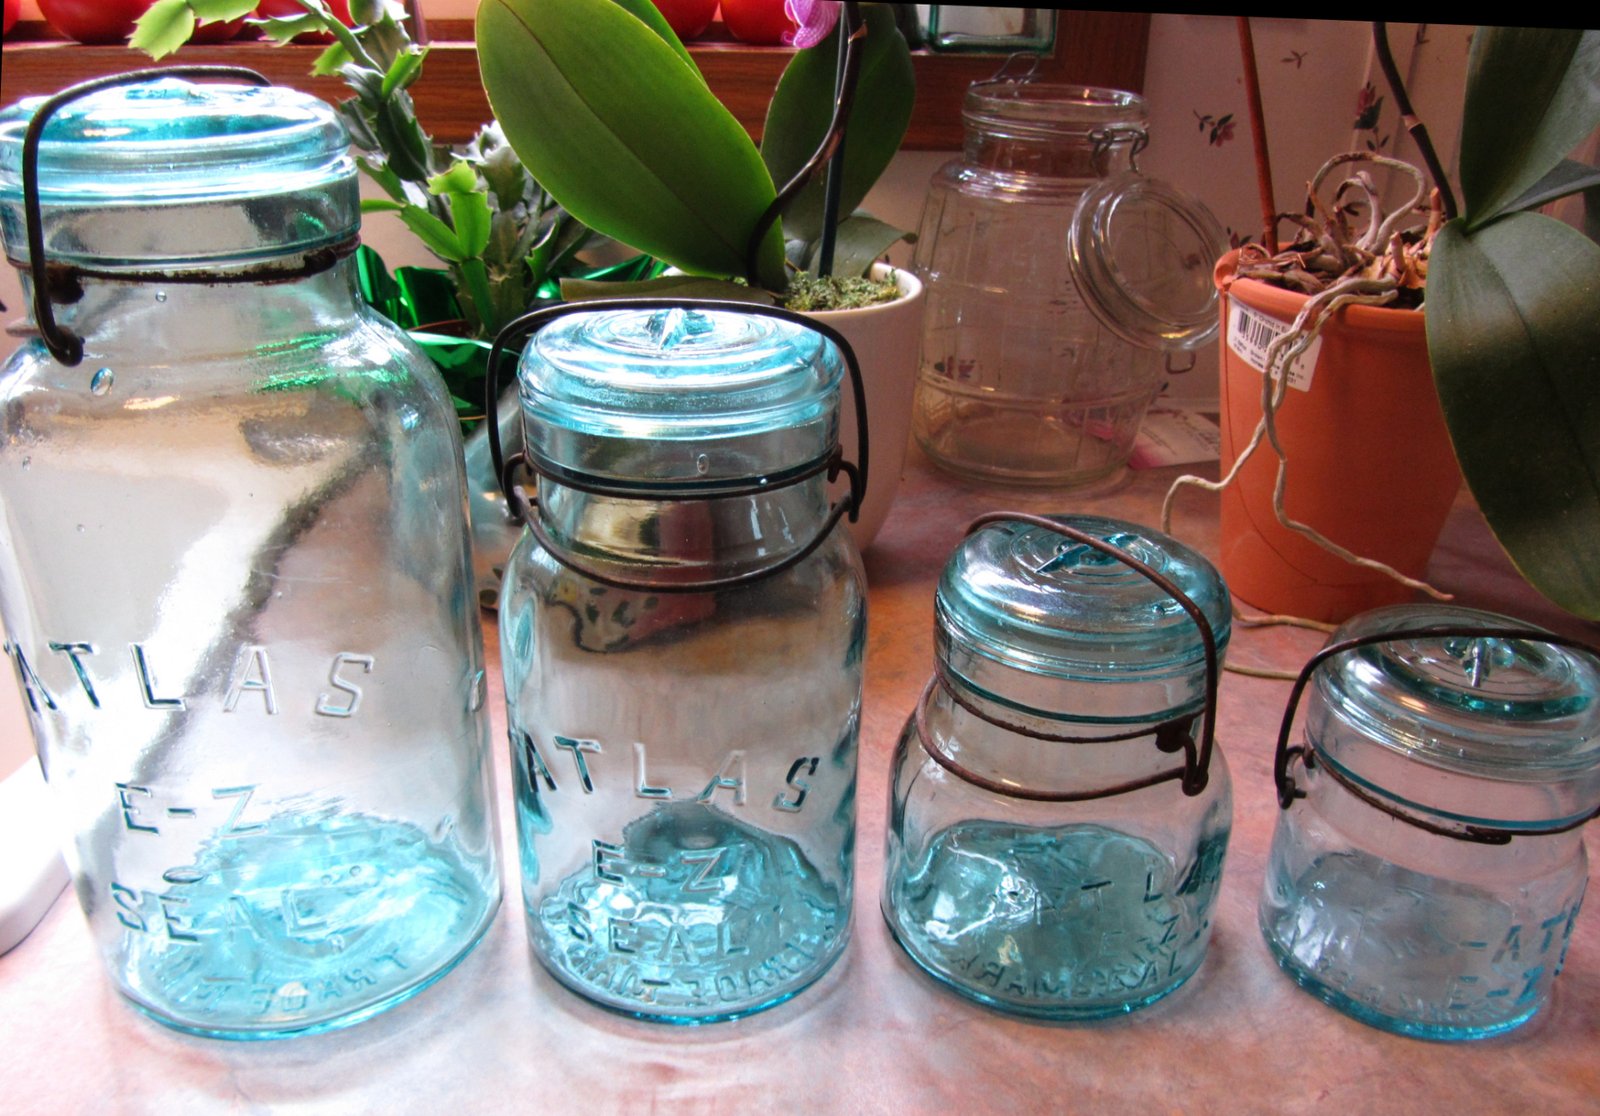 https://antiquesknowhow.com/wp-content/uploads/2023/06/Rare-and-Valuable-Mason-Jars.jpg